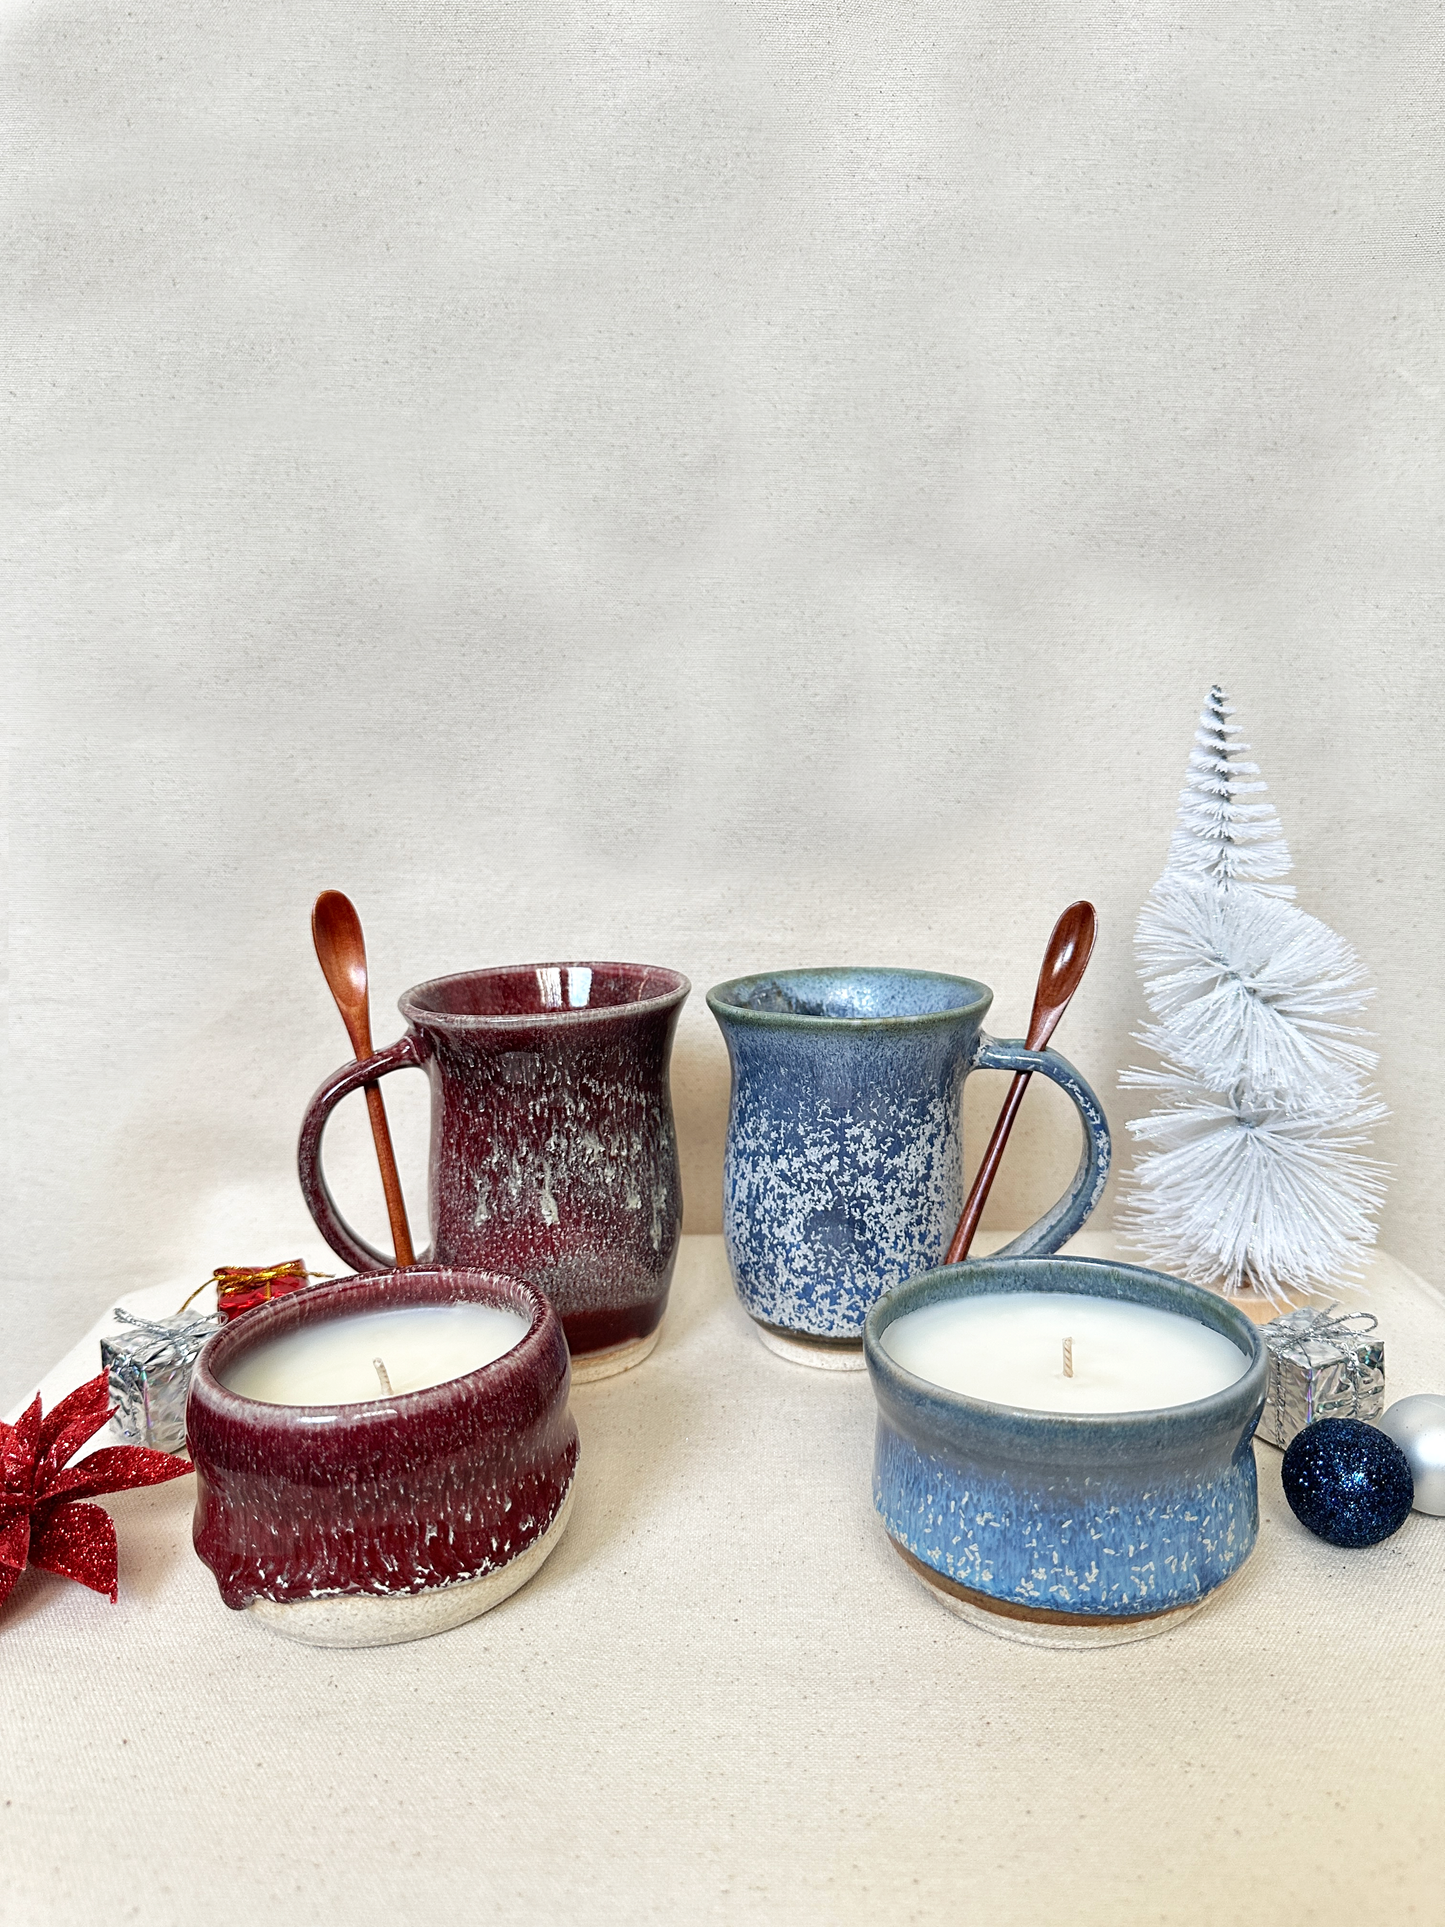 Holiday Cranberry Mug w/ Wooden Spoon